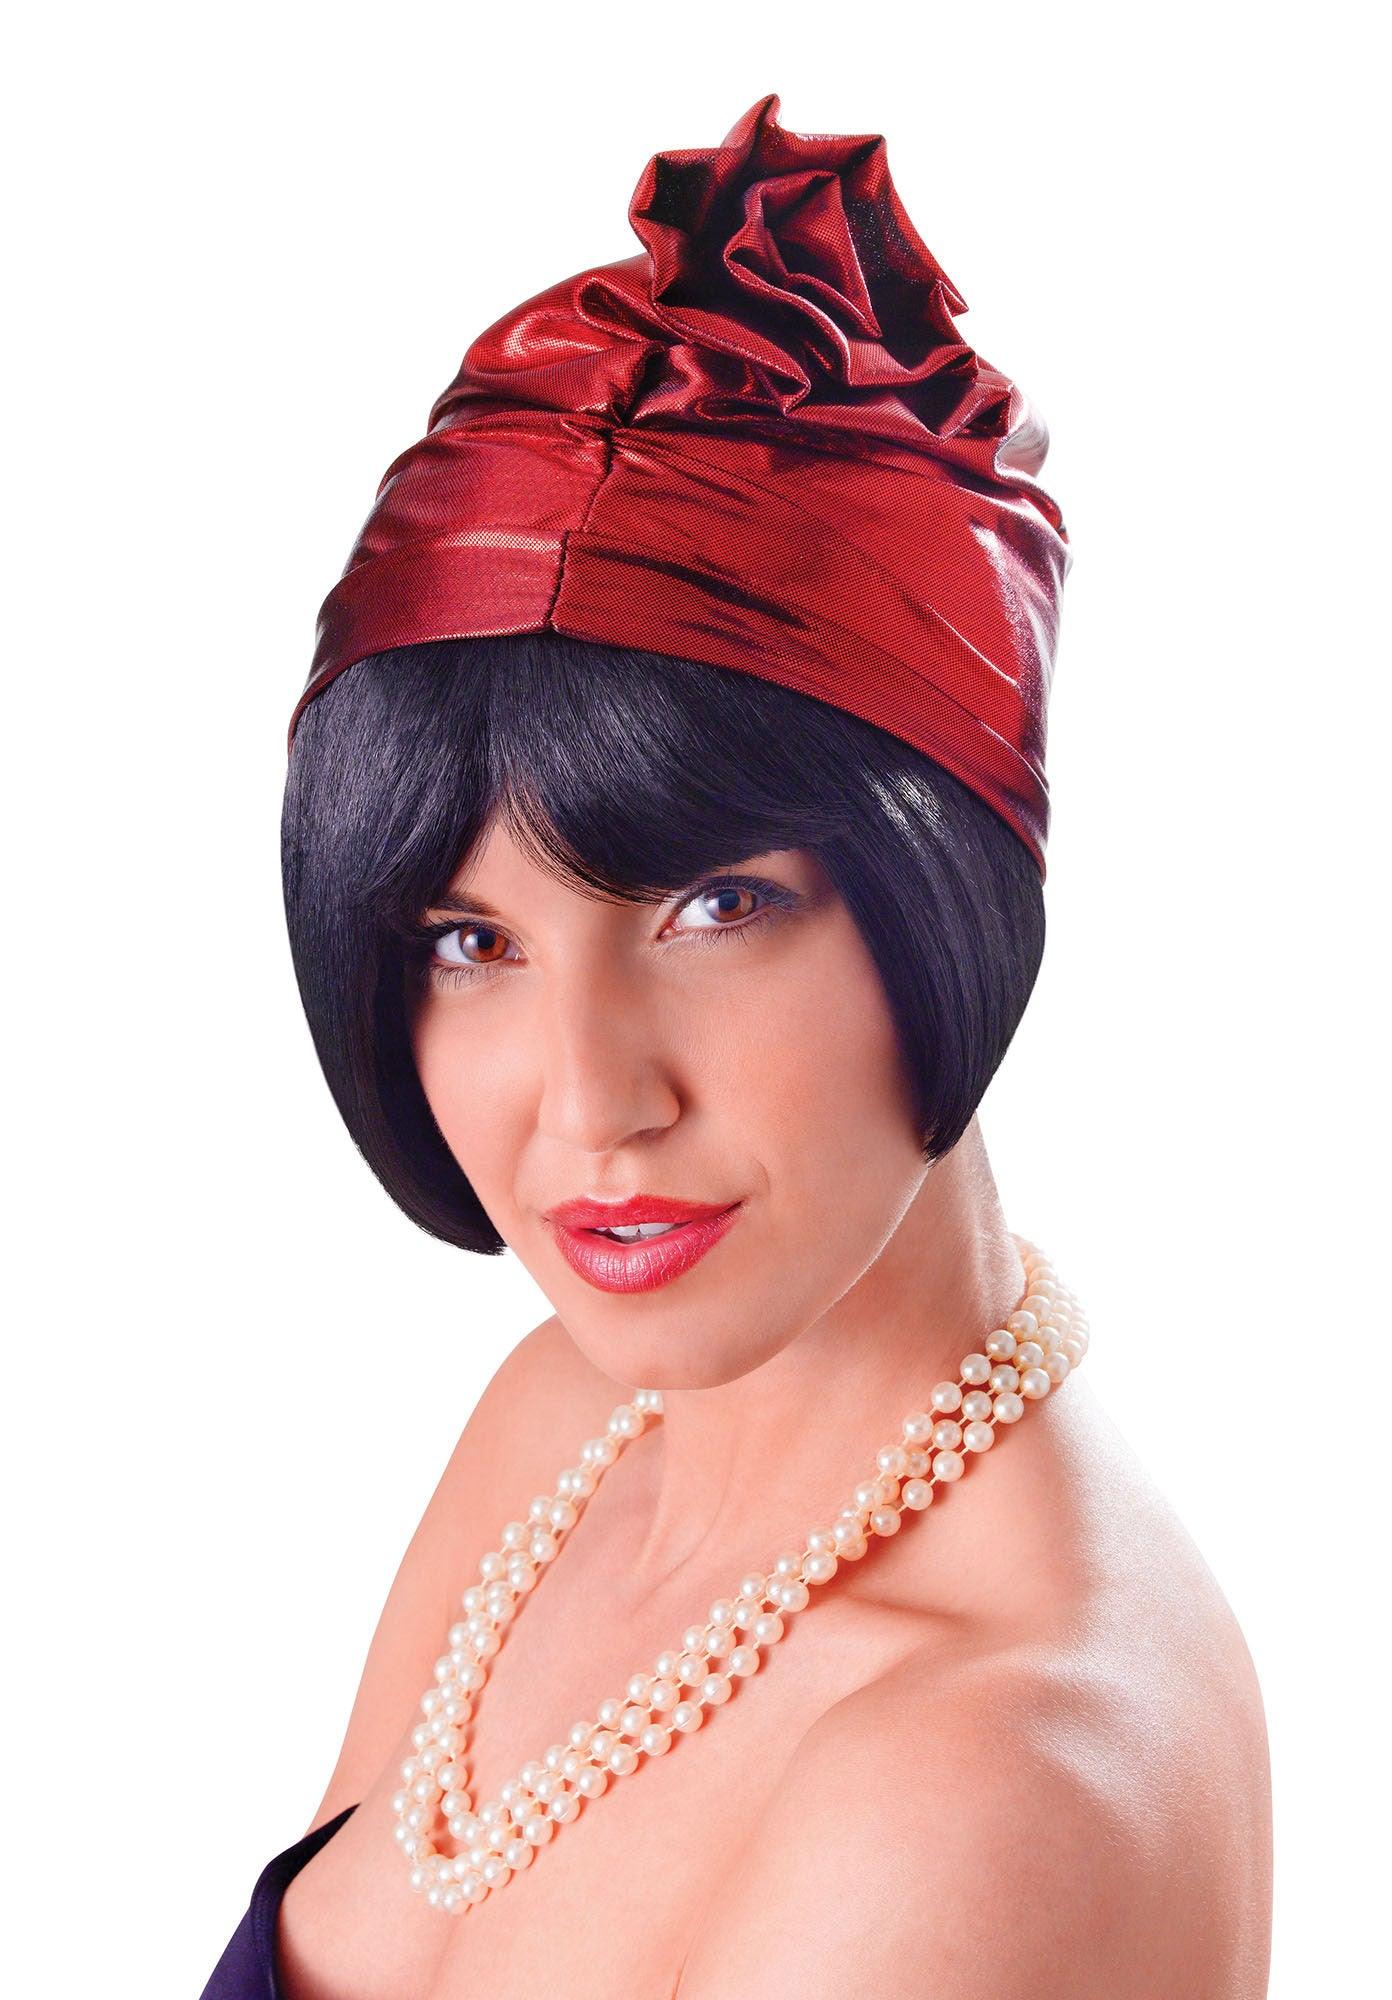 Ladies Girls 20’s Cloche Hat Charleston Fancy Dress Party Costume Accessory - Labreeze